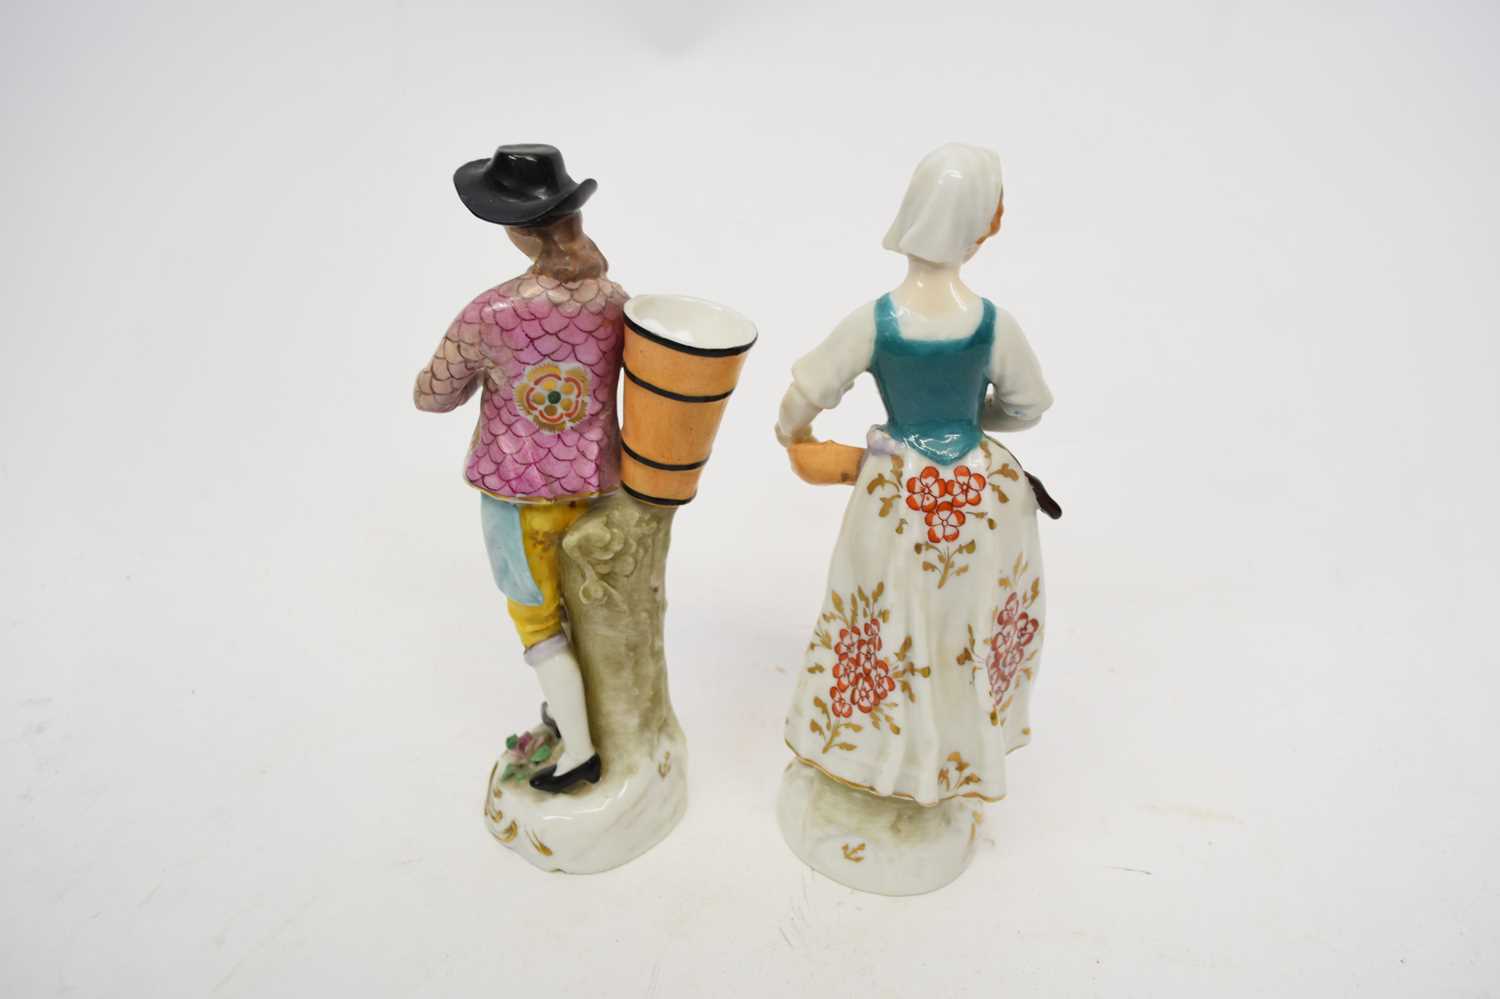 Pair of 19th century Continental porcelain figurines - Image 2 of 2